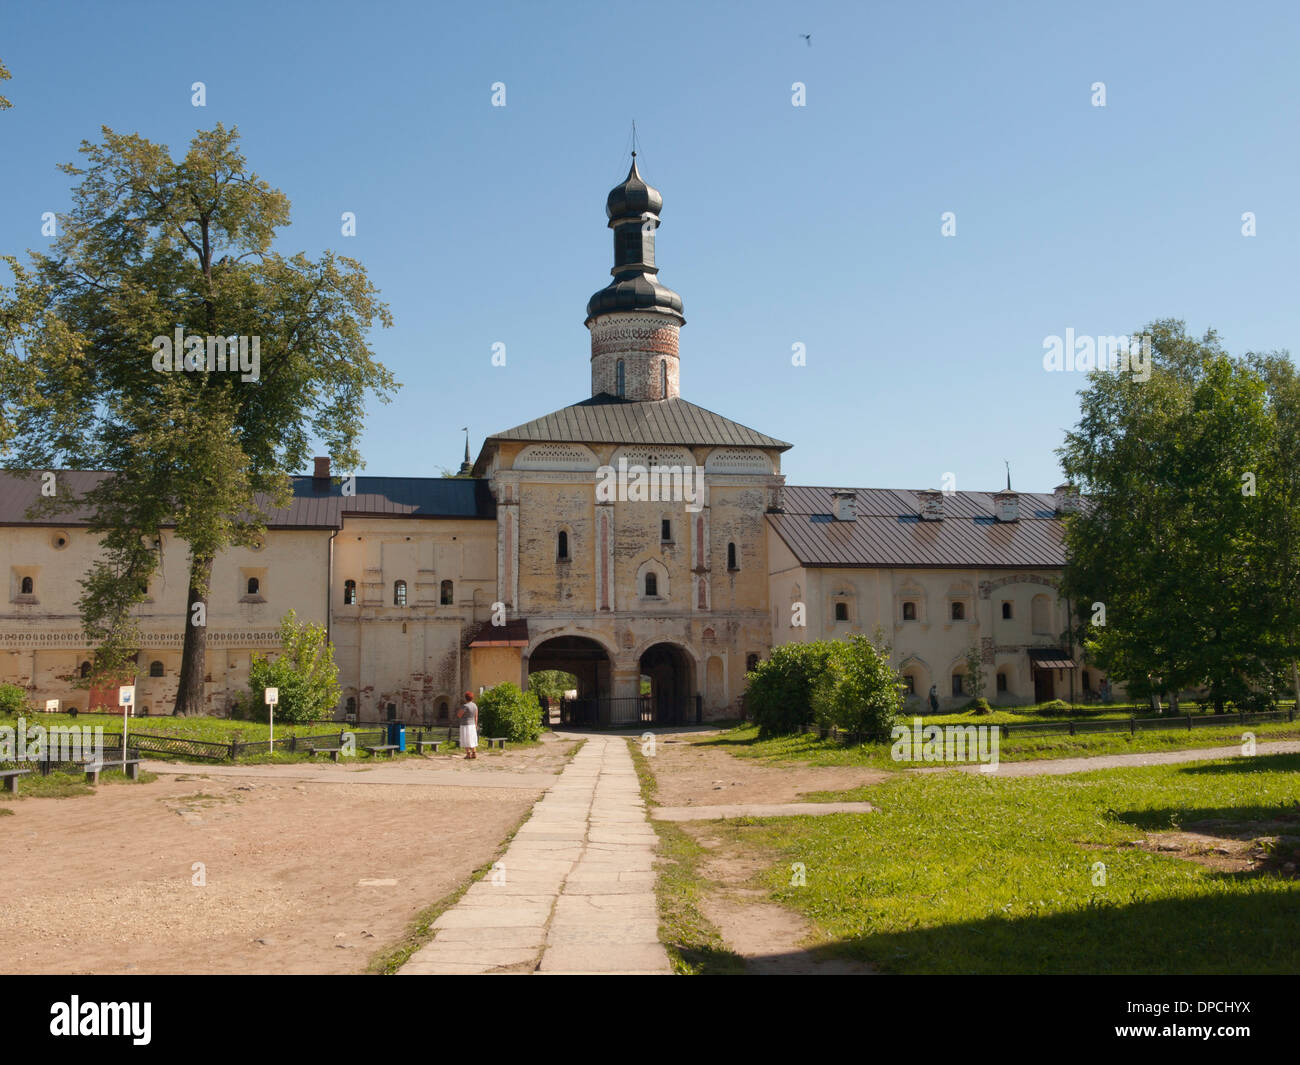 Kirillo-Belozersky Monastery near the village of Goritzy Russia founded by Saint Cyril, connected with the Cyrillic alphabet Stock Photo